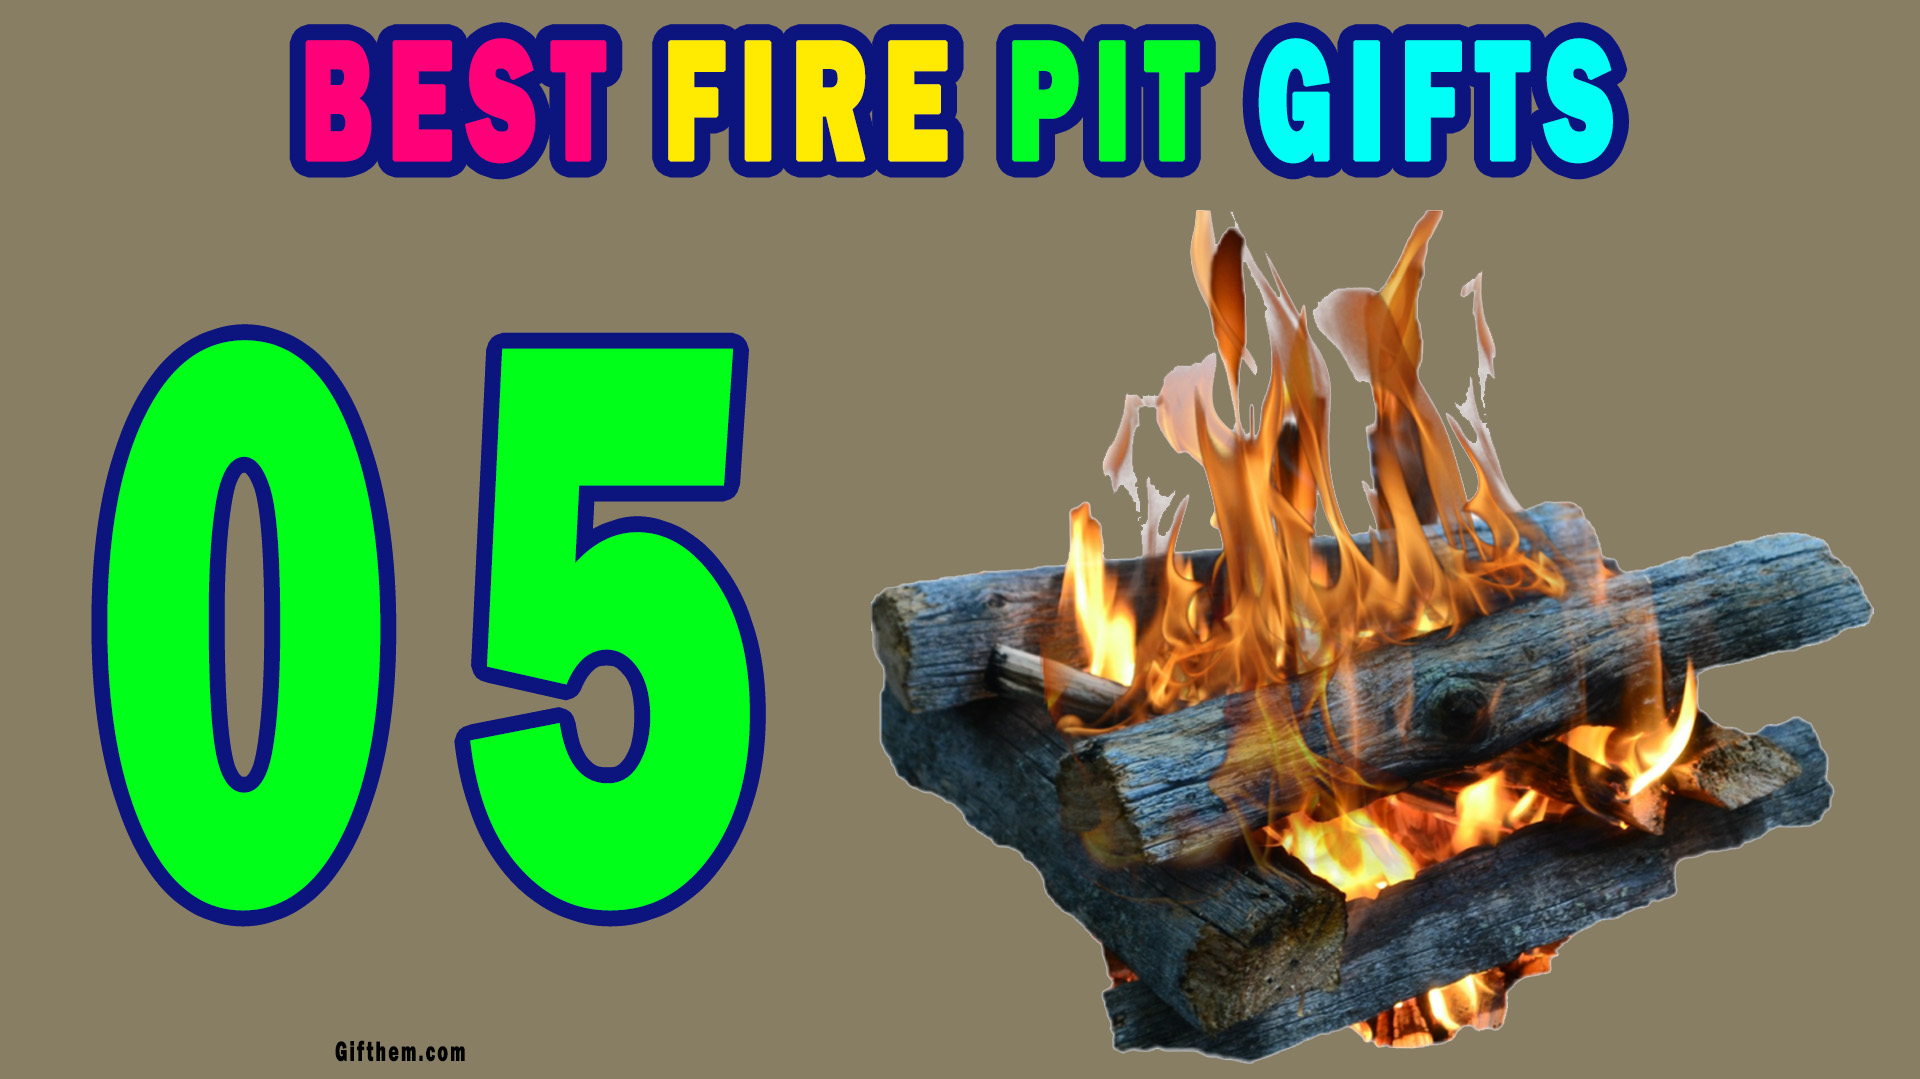 Best Fire Pit Gifts